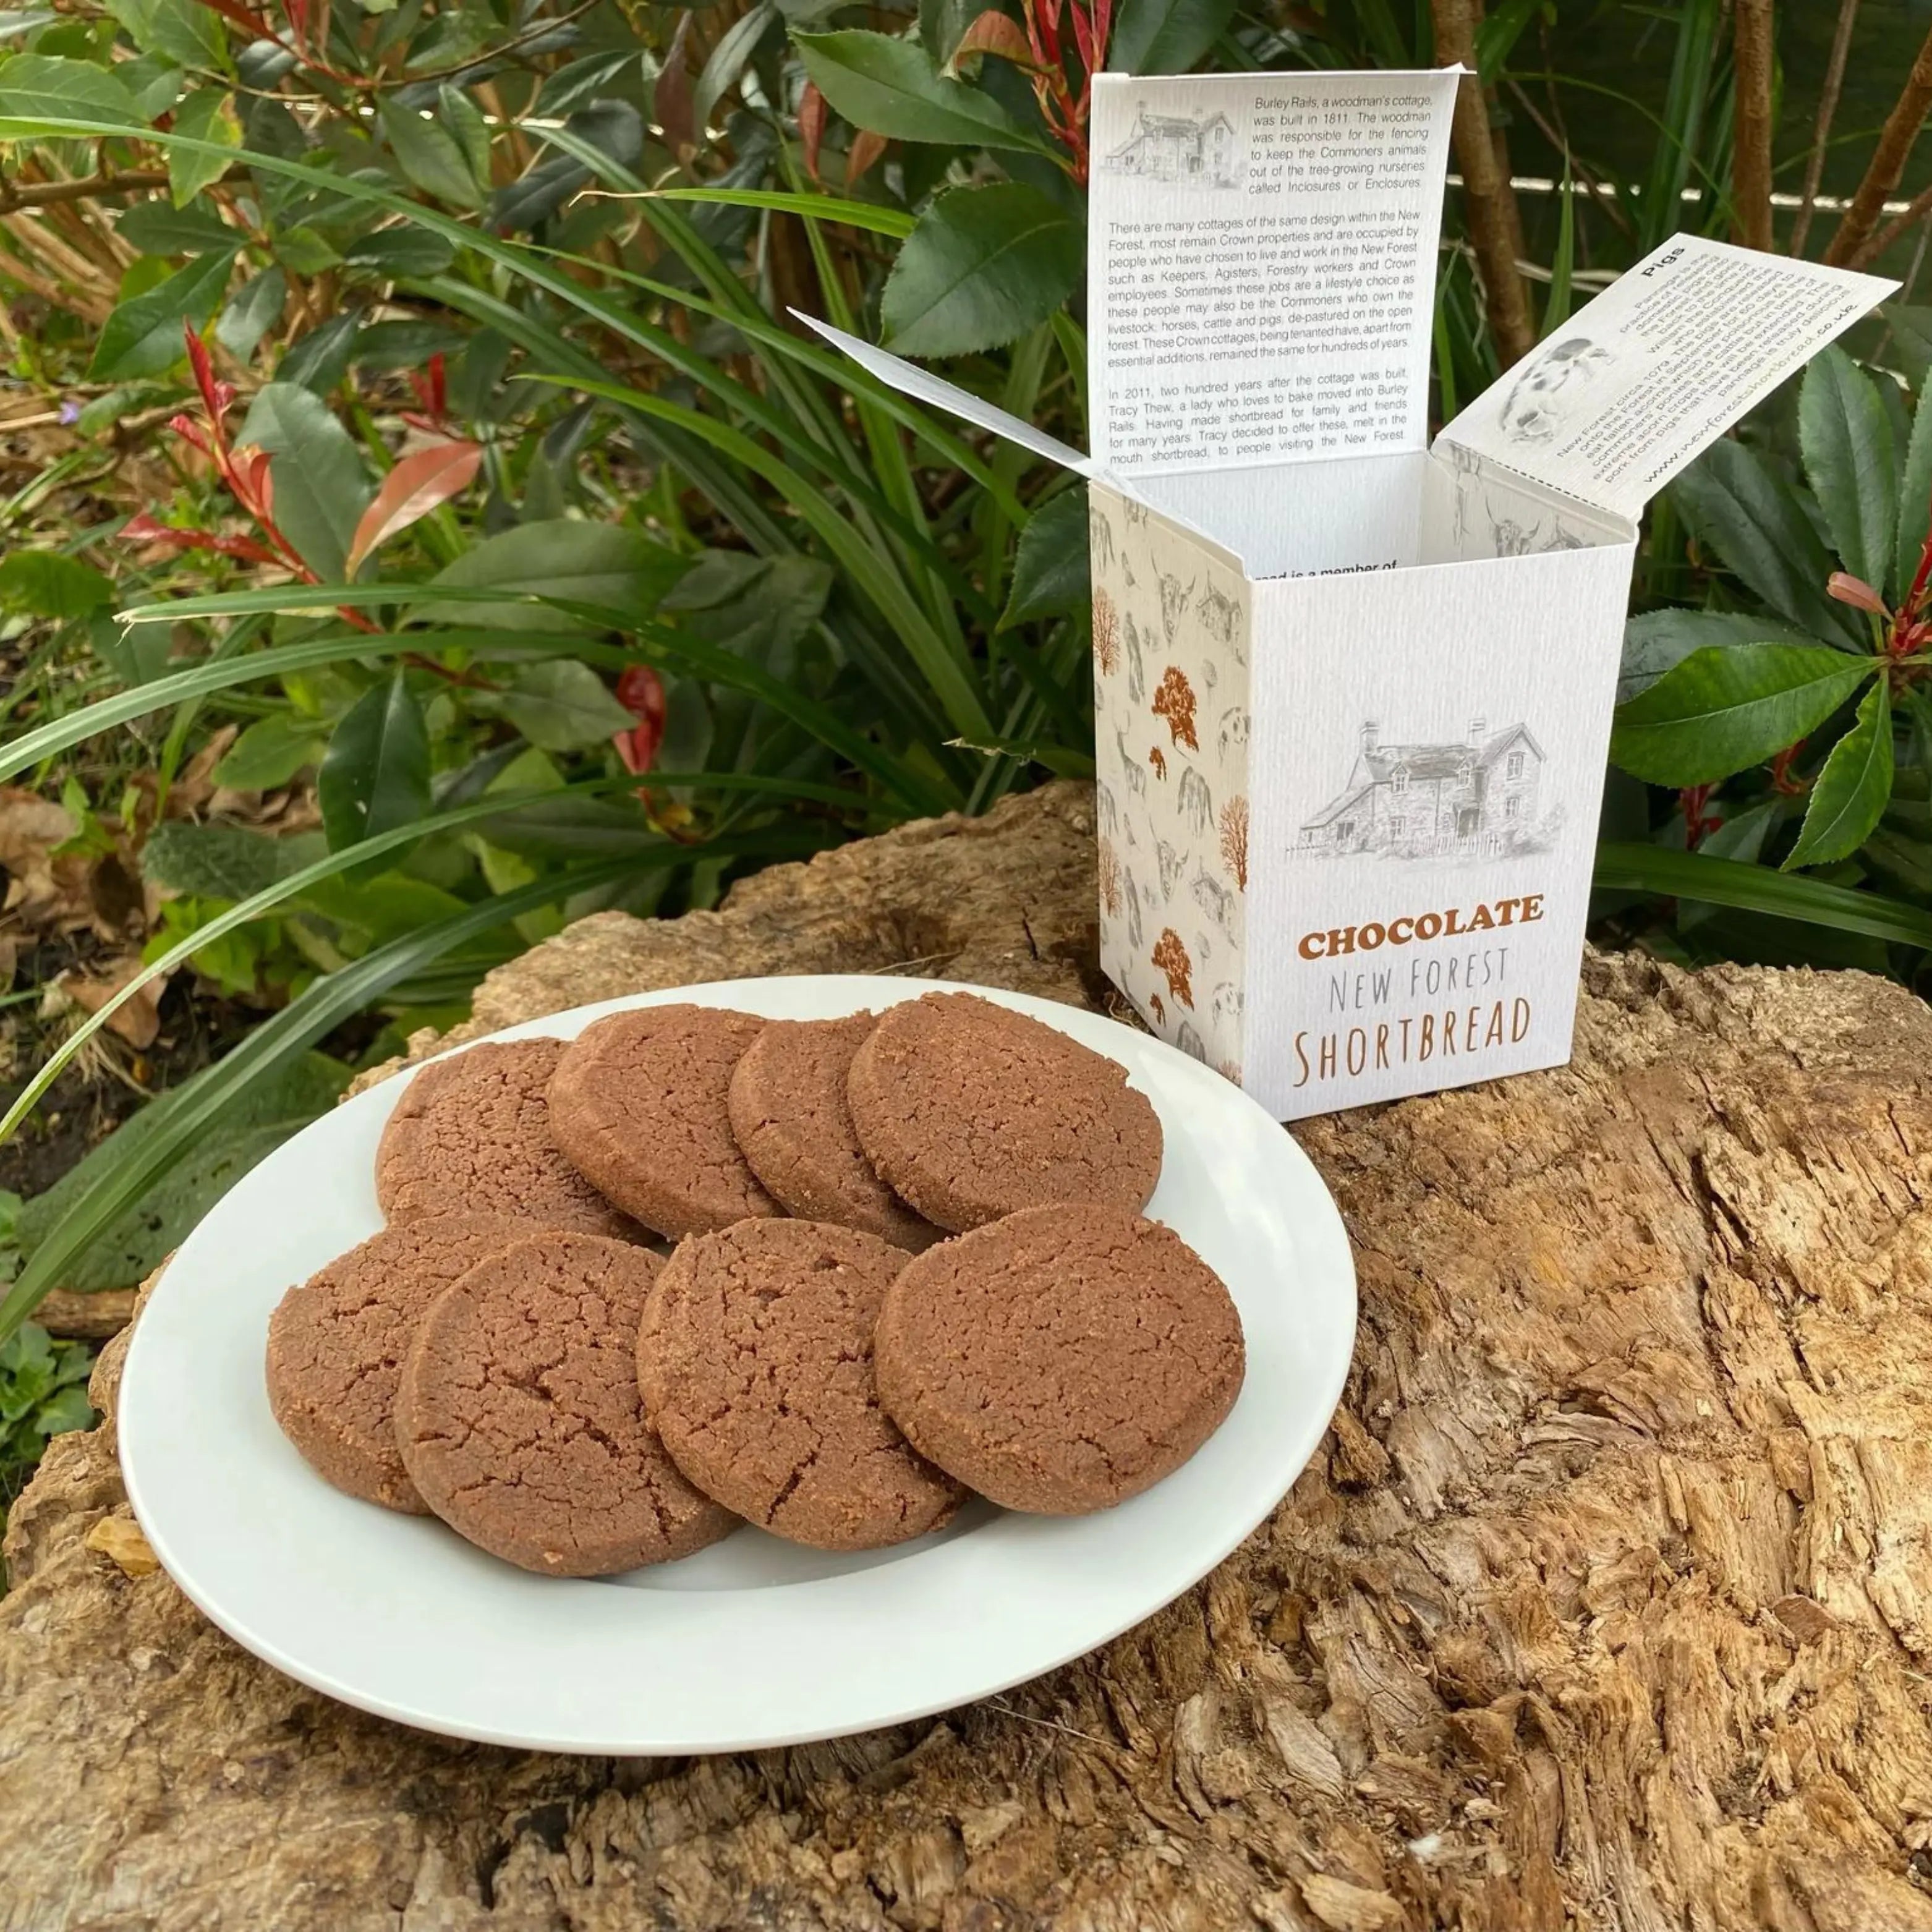 Chocolate flavoured shortbread | New Forest Shortbread | Short Bread Gifts